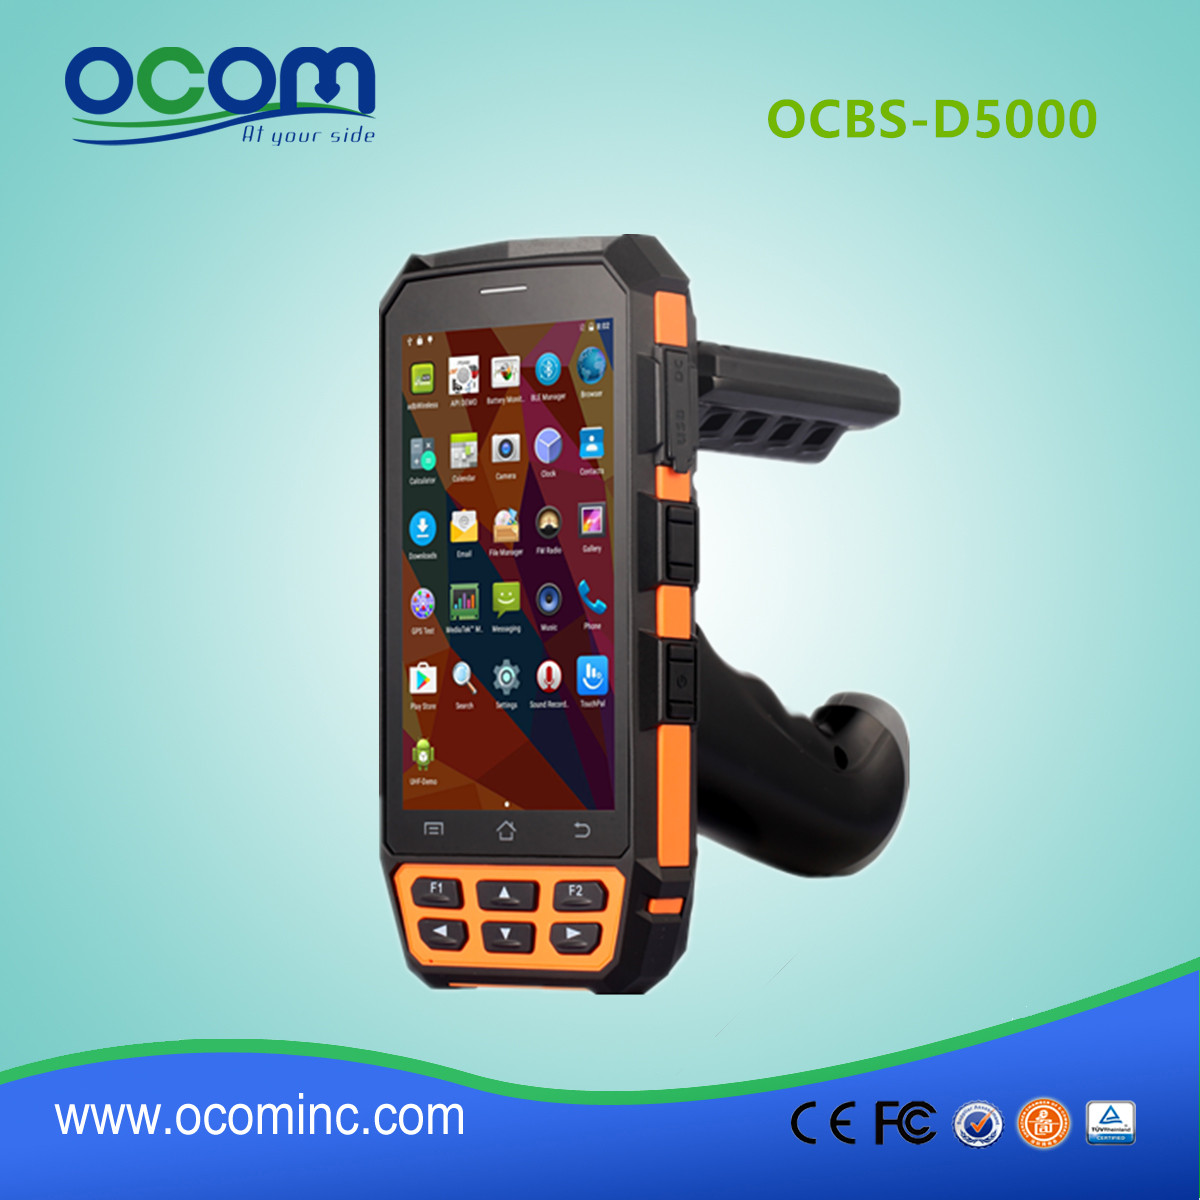 OCBS-D5000 Android 7.0 Rugged Data Collector  Industrial PDA with Wifi